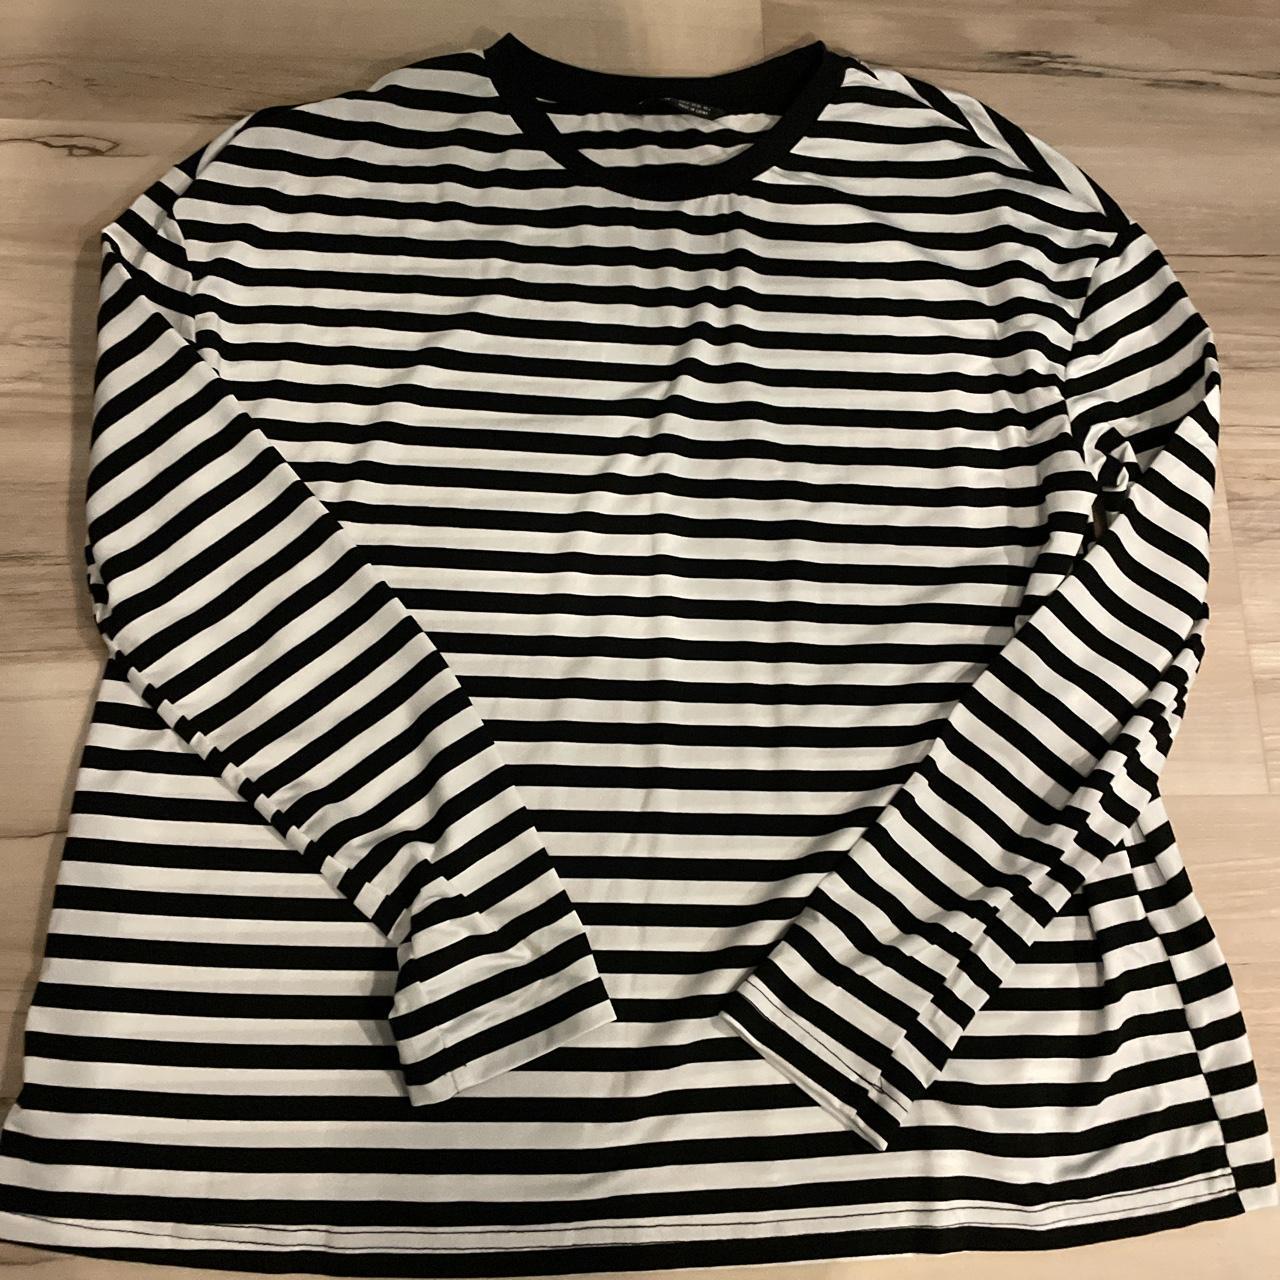 black and white stripe long sleeve top size small - Depop